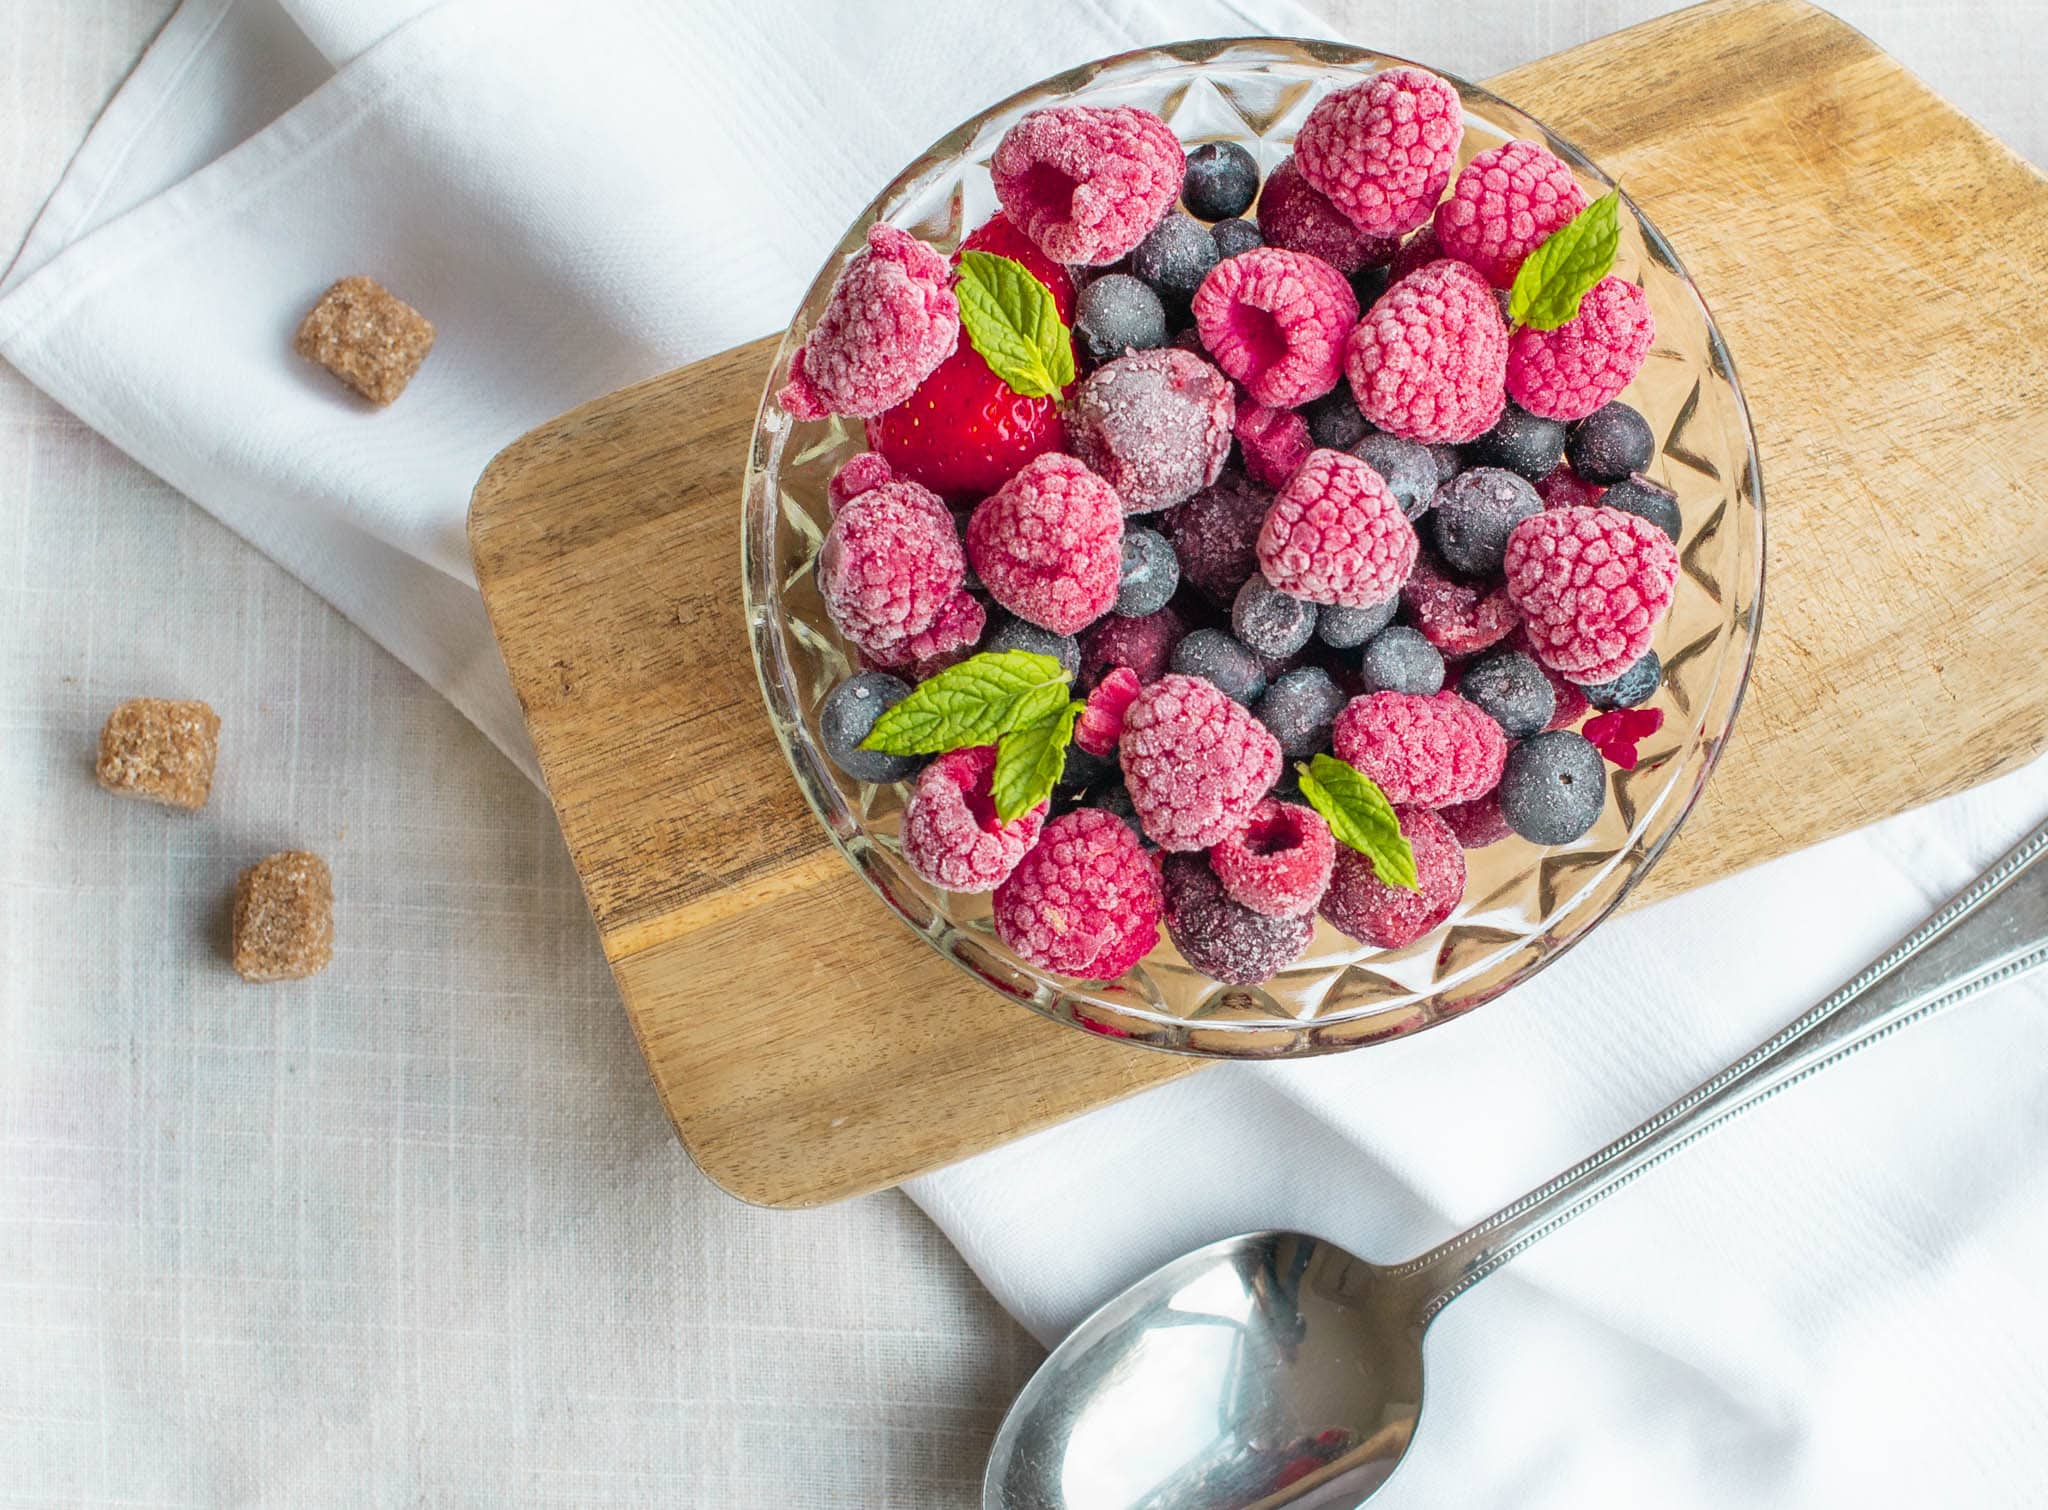 Glass bowl of frozen berries on wooden board with metal spoon and sugar cubes